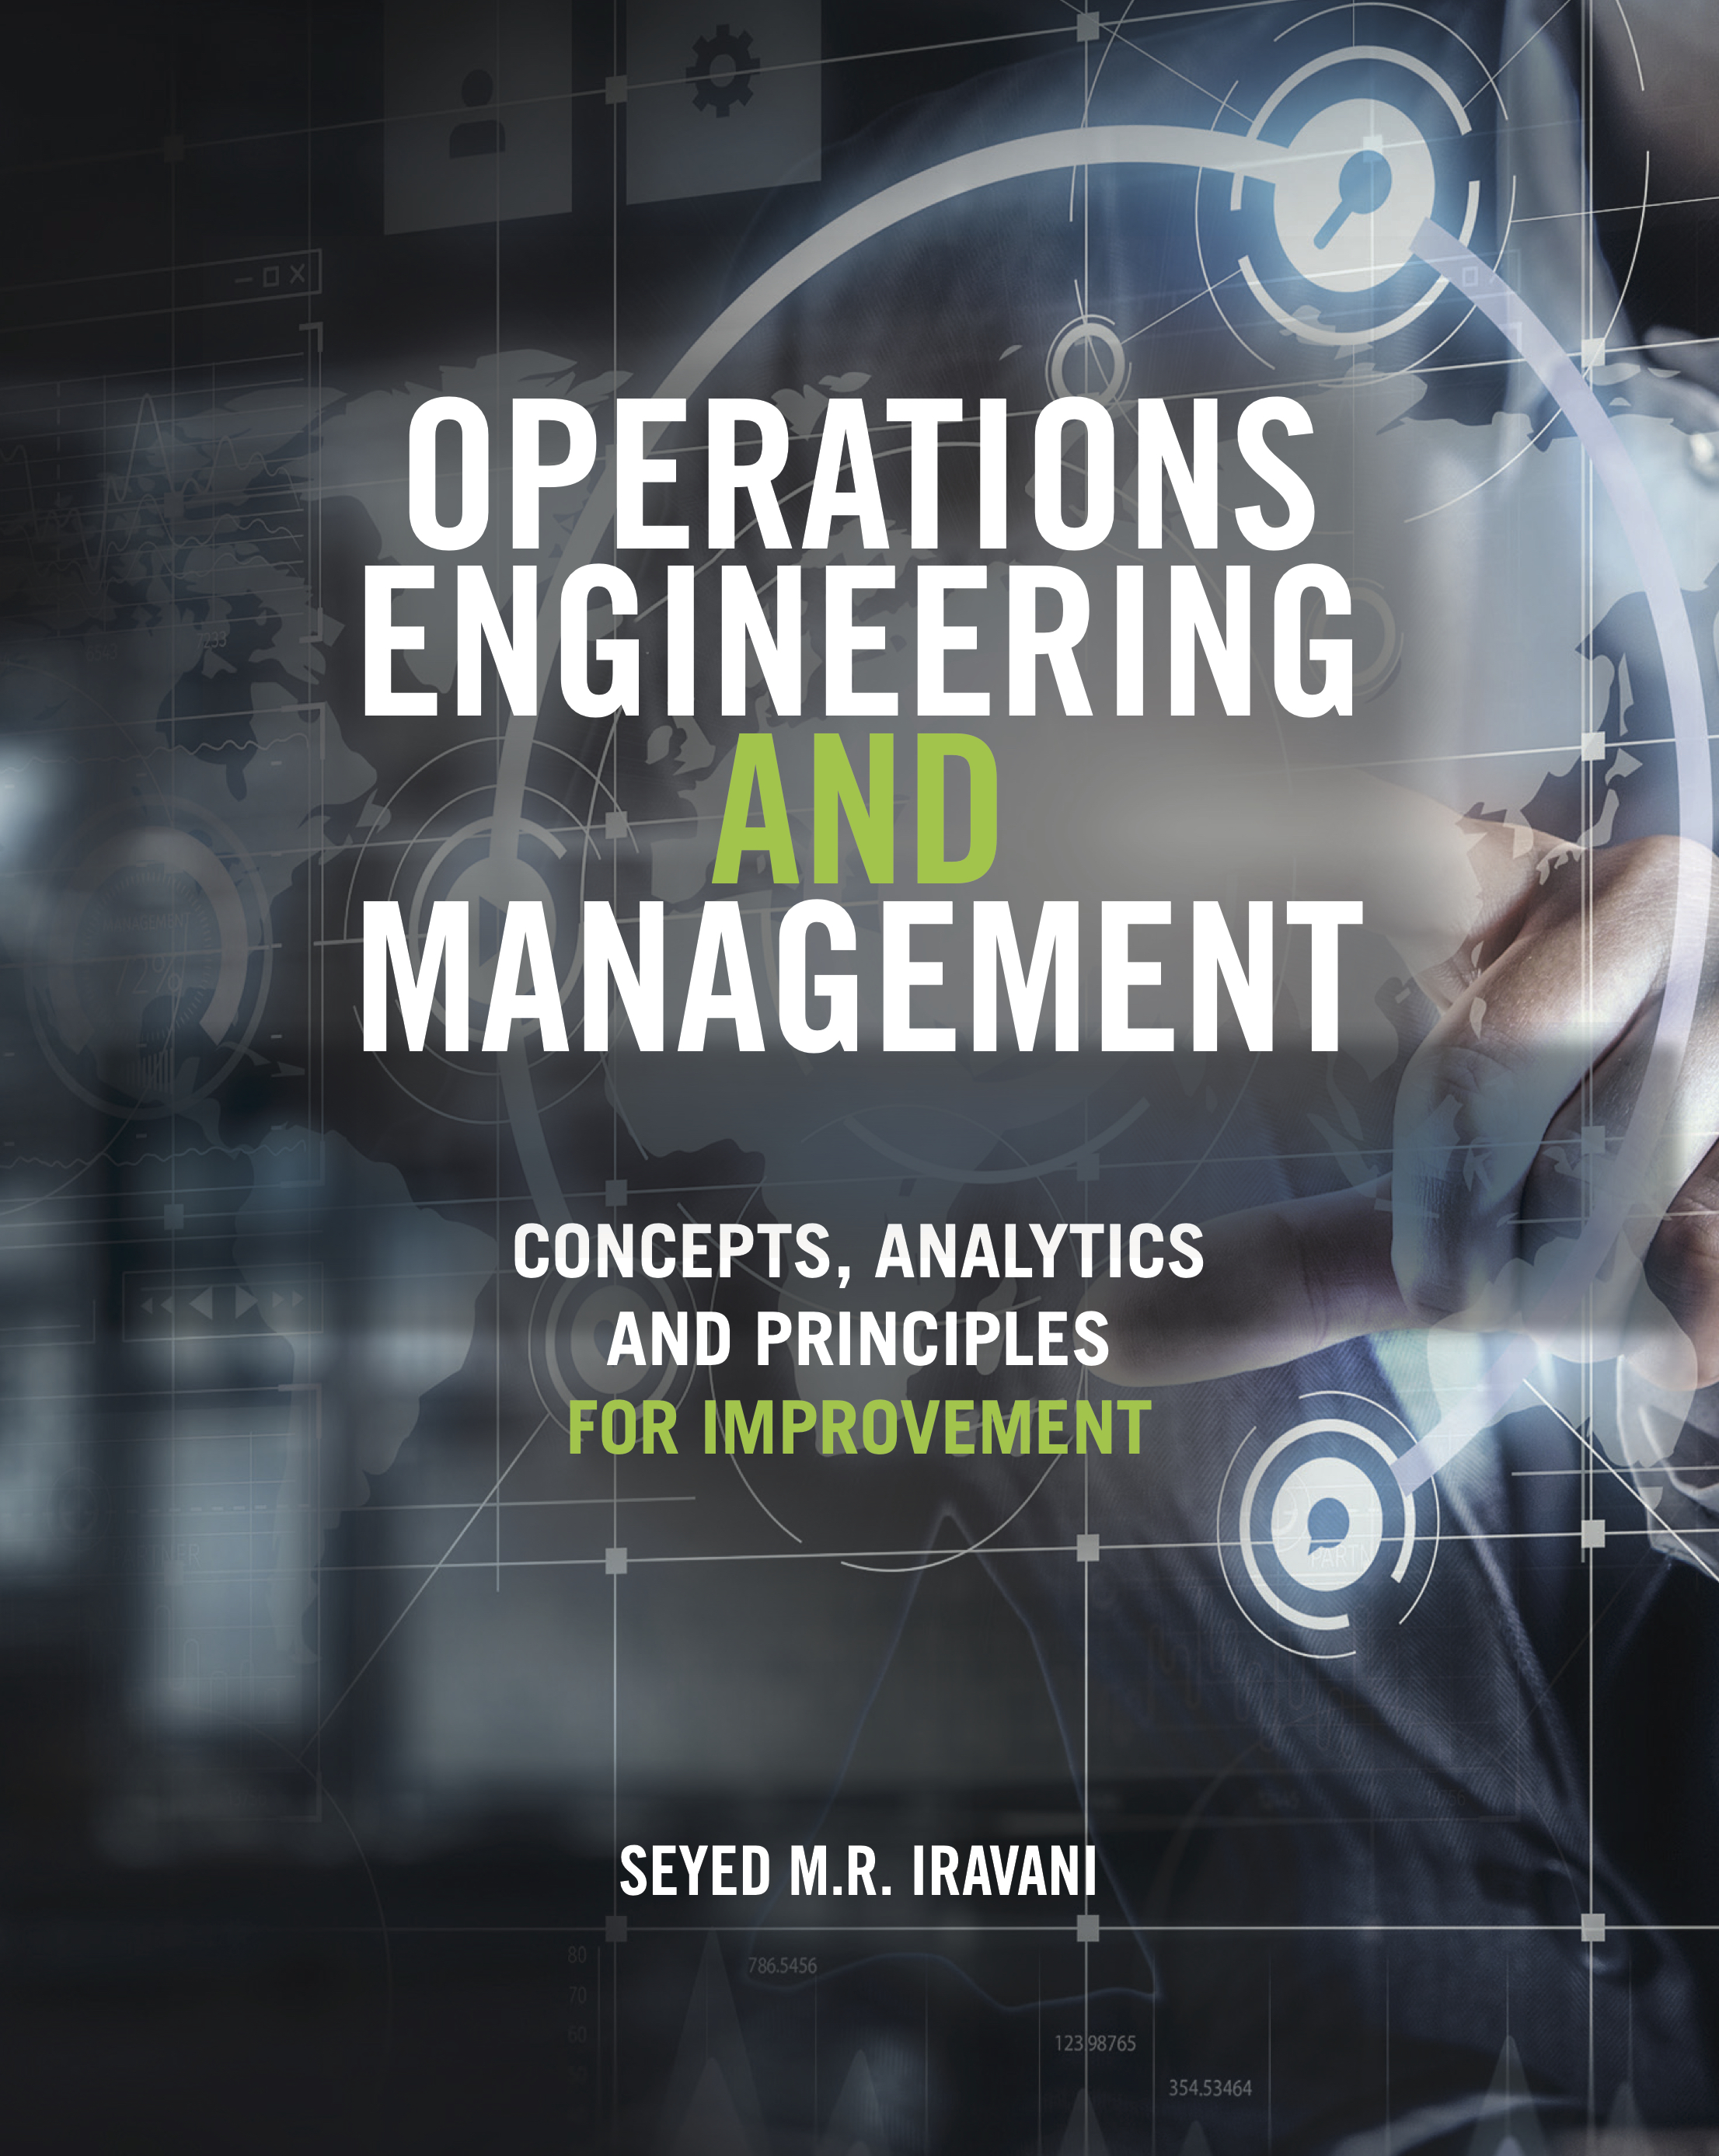 "Operations Engineering And Management: Concepts, Analytics And Principles For Improvement" is Seyed Iravani's first textbook.